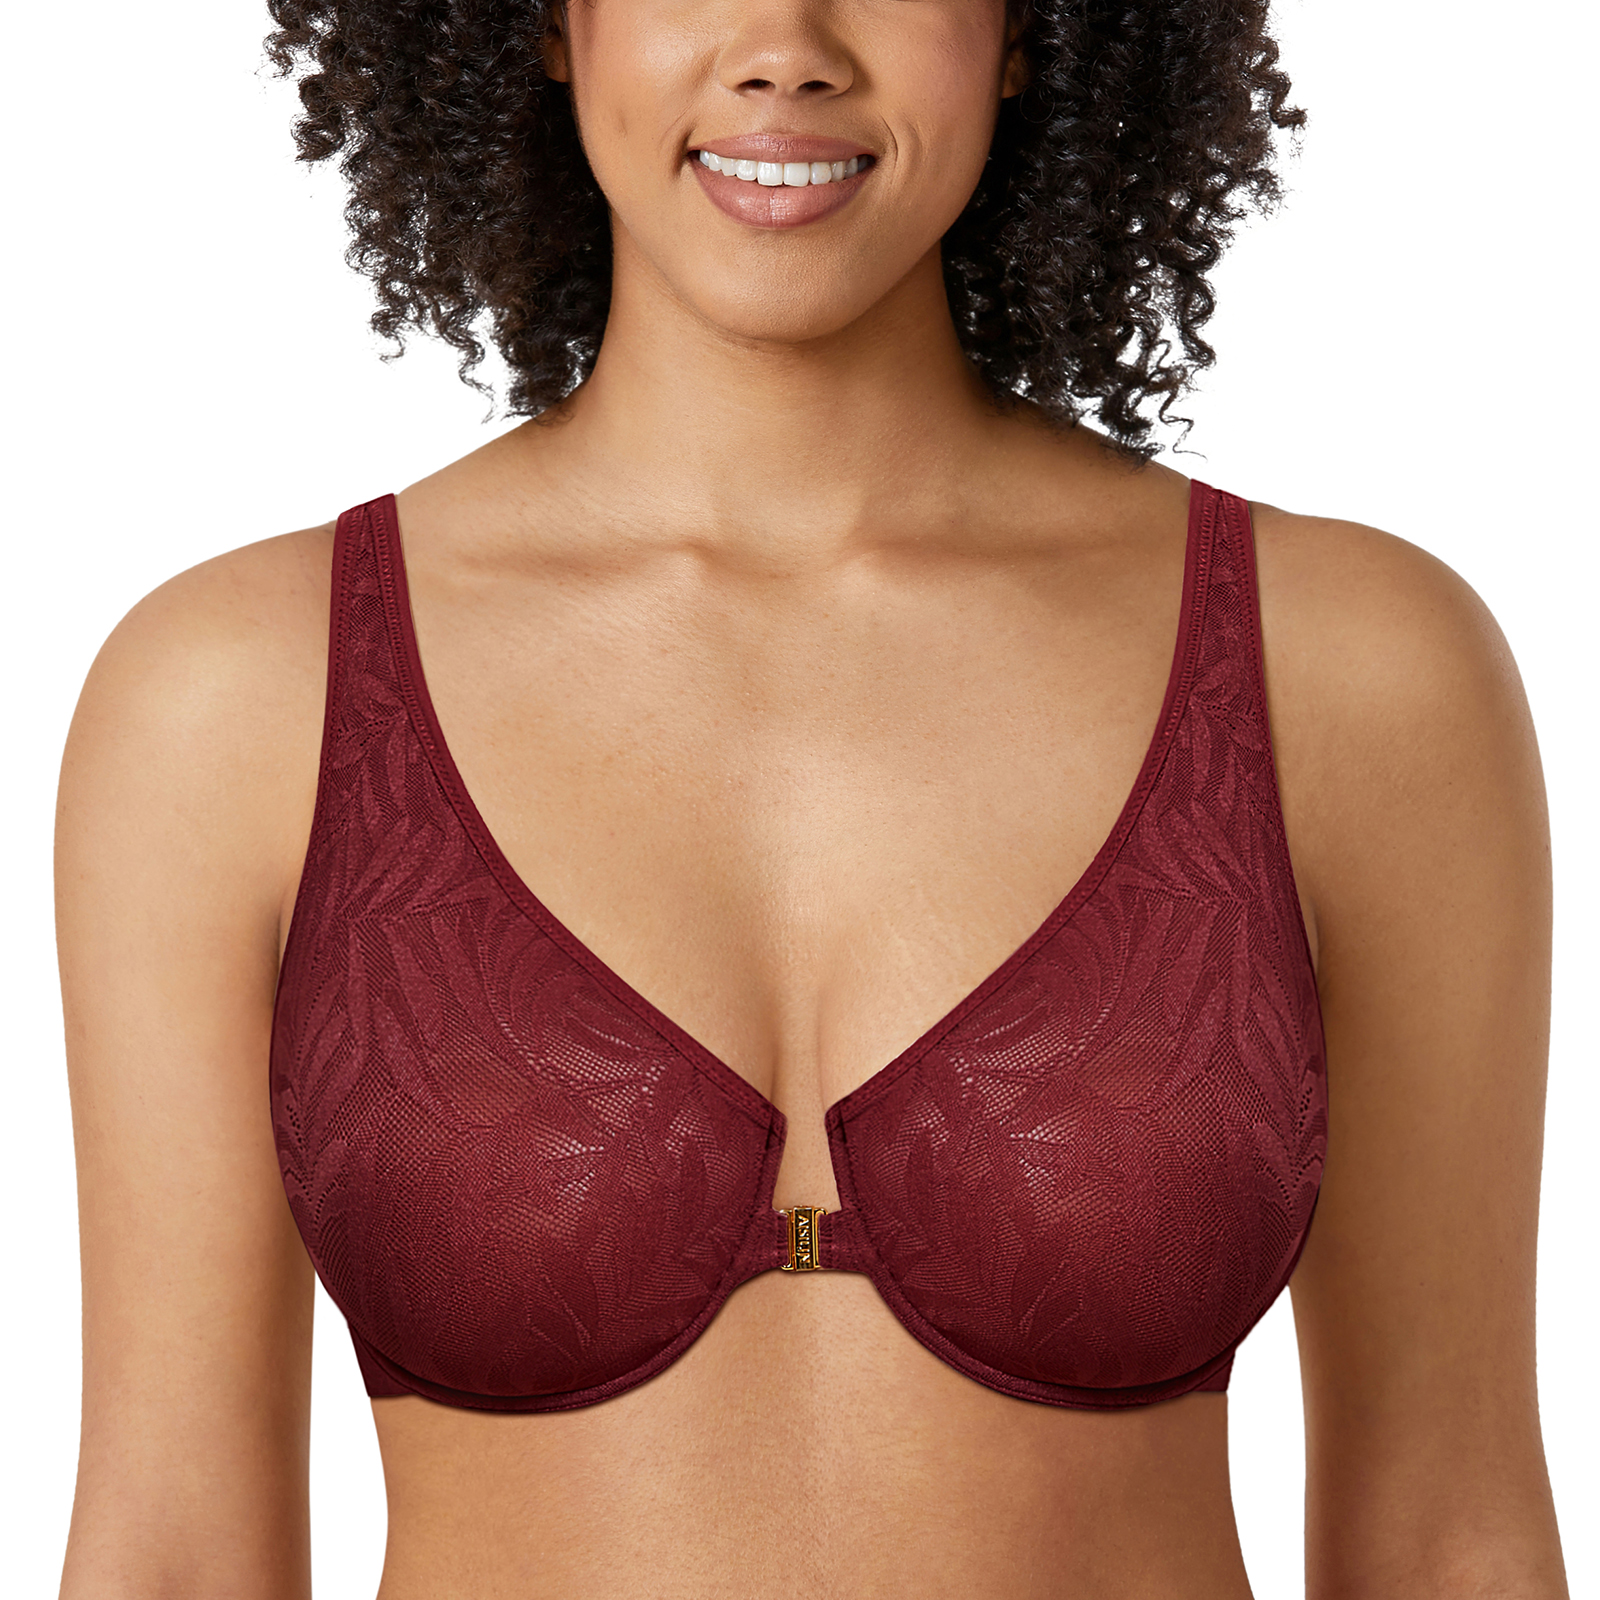 AISILIN Women's Front Closure Bra Unlined Lace Plunge Sexy